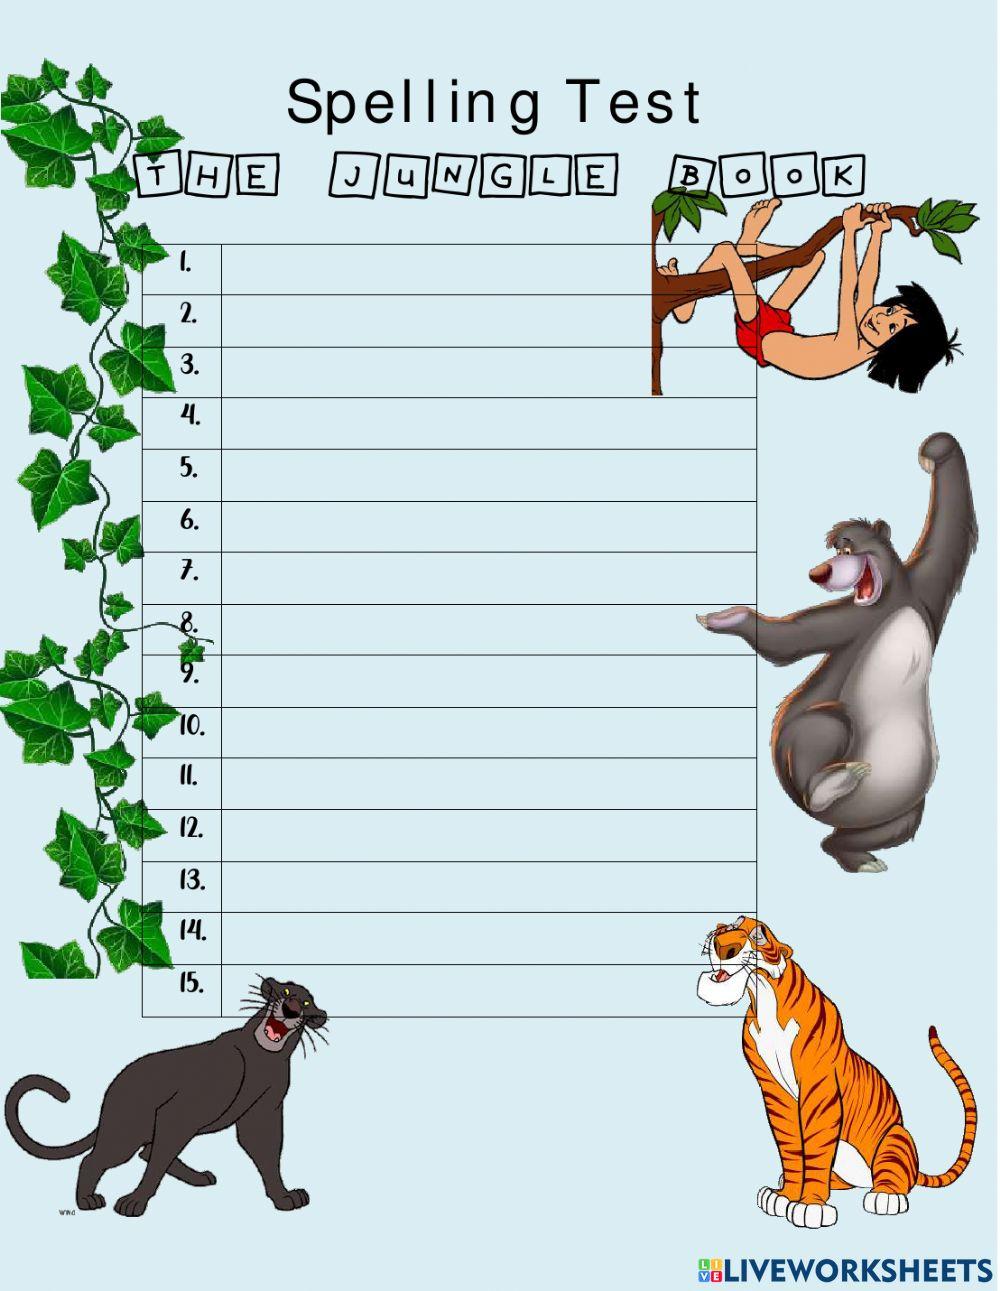 The Jungle Book Spelling Test